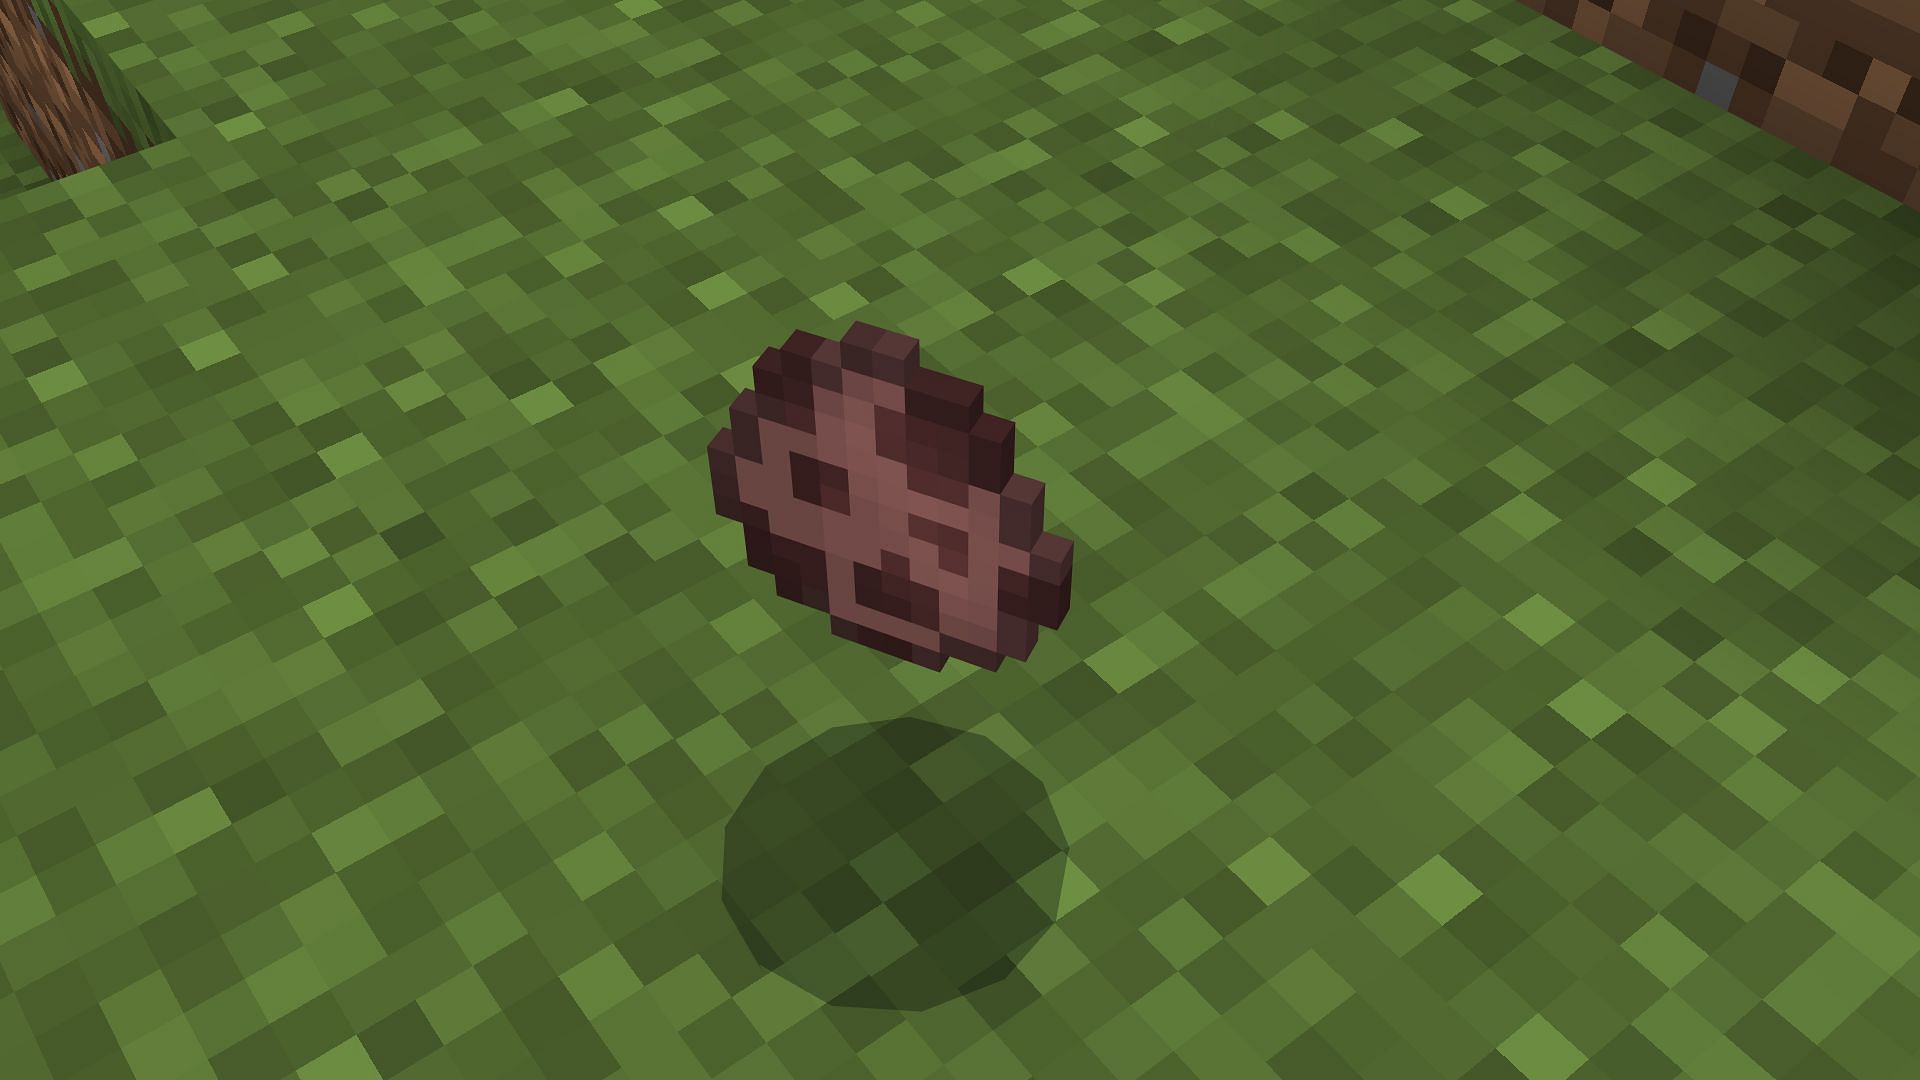 Armadillo spawn eggs can be obtained from commands or creative mode inventory. (Image via Mojang Studios)